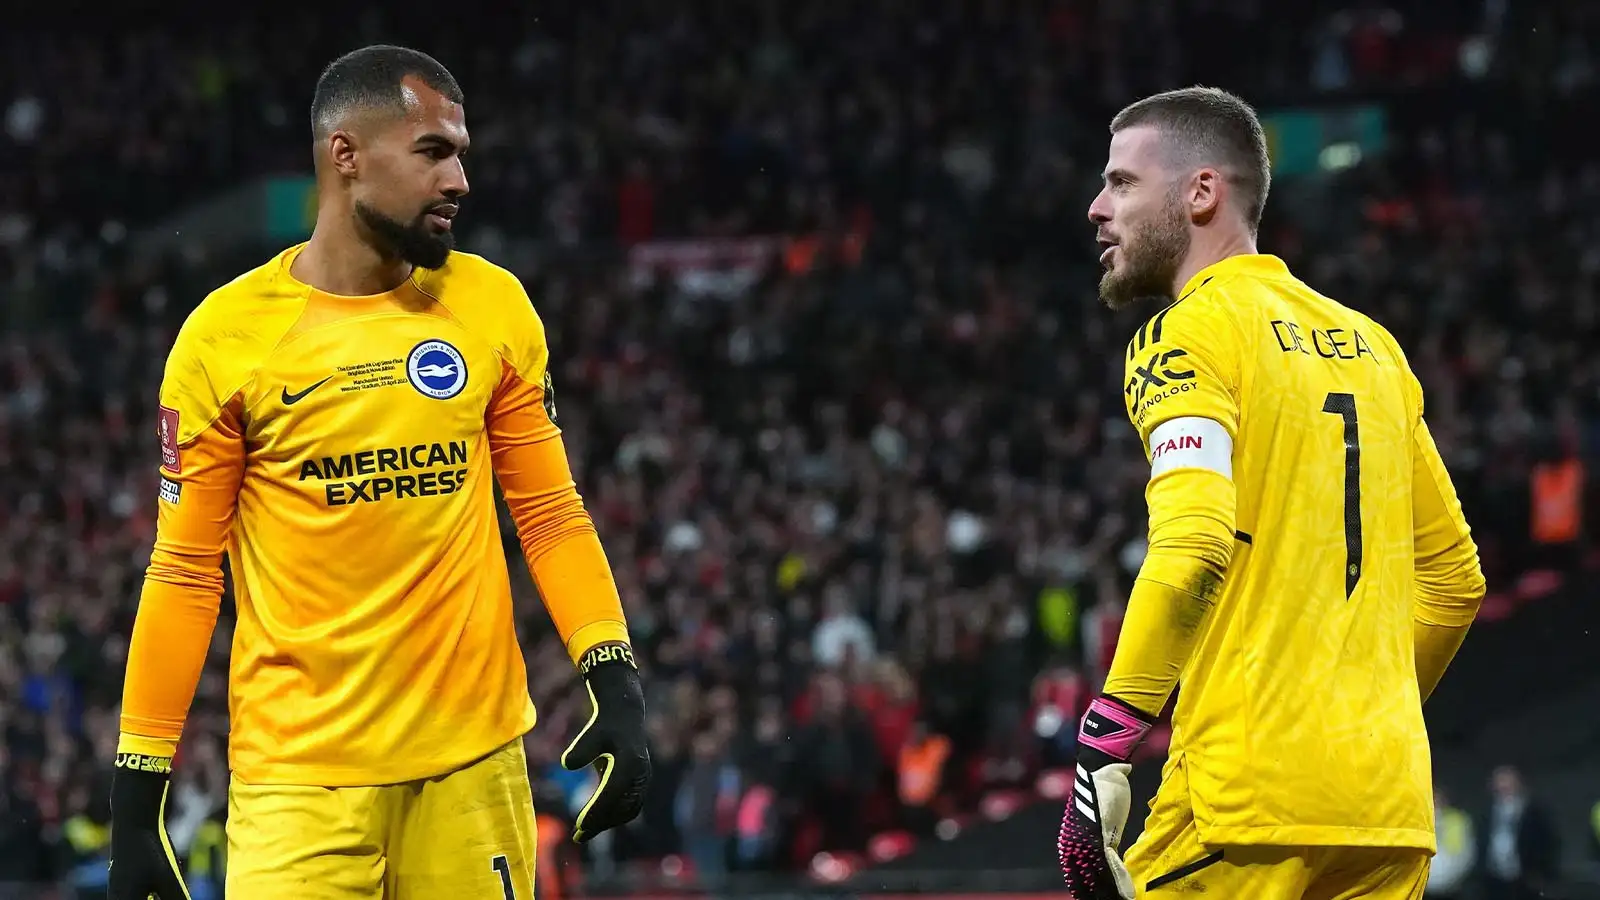 Brighton and Hove Albion goalkeeper Robert Sanchez and Manchester United goalkeeper David de Gea speak in the penalty shoot-out during the Emirates FA Cup semi-final match at Wembley Stadium, London